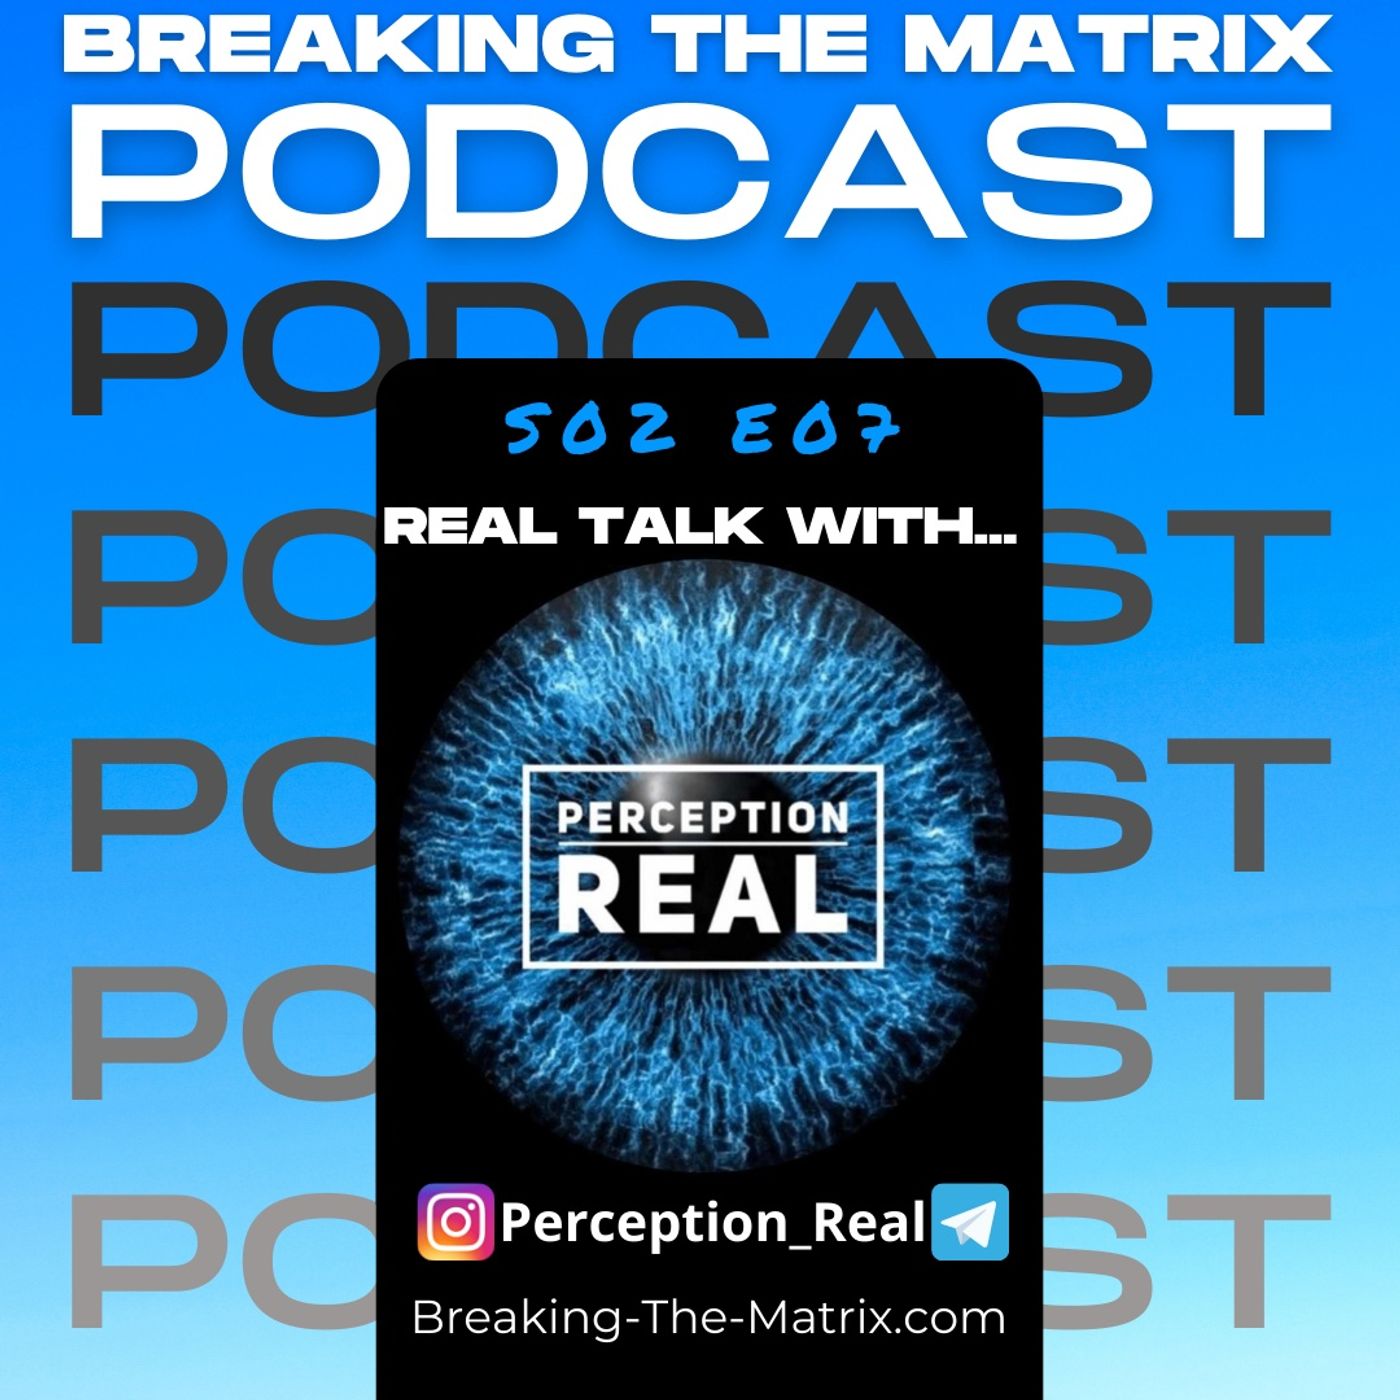 BTM PODCAST S02E07: REAL TALK WITH... PERCEPTION_REAL